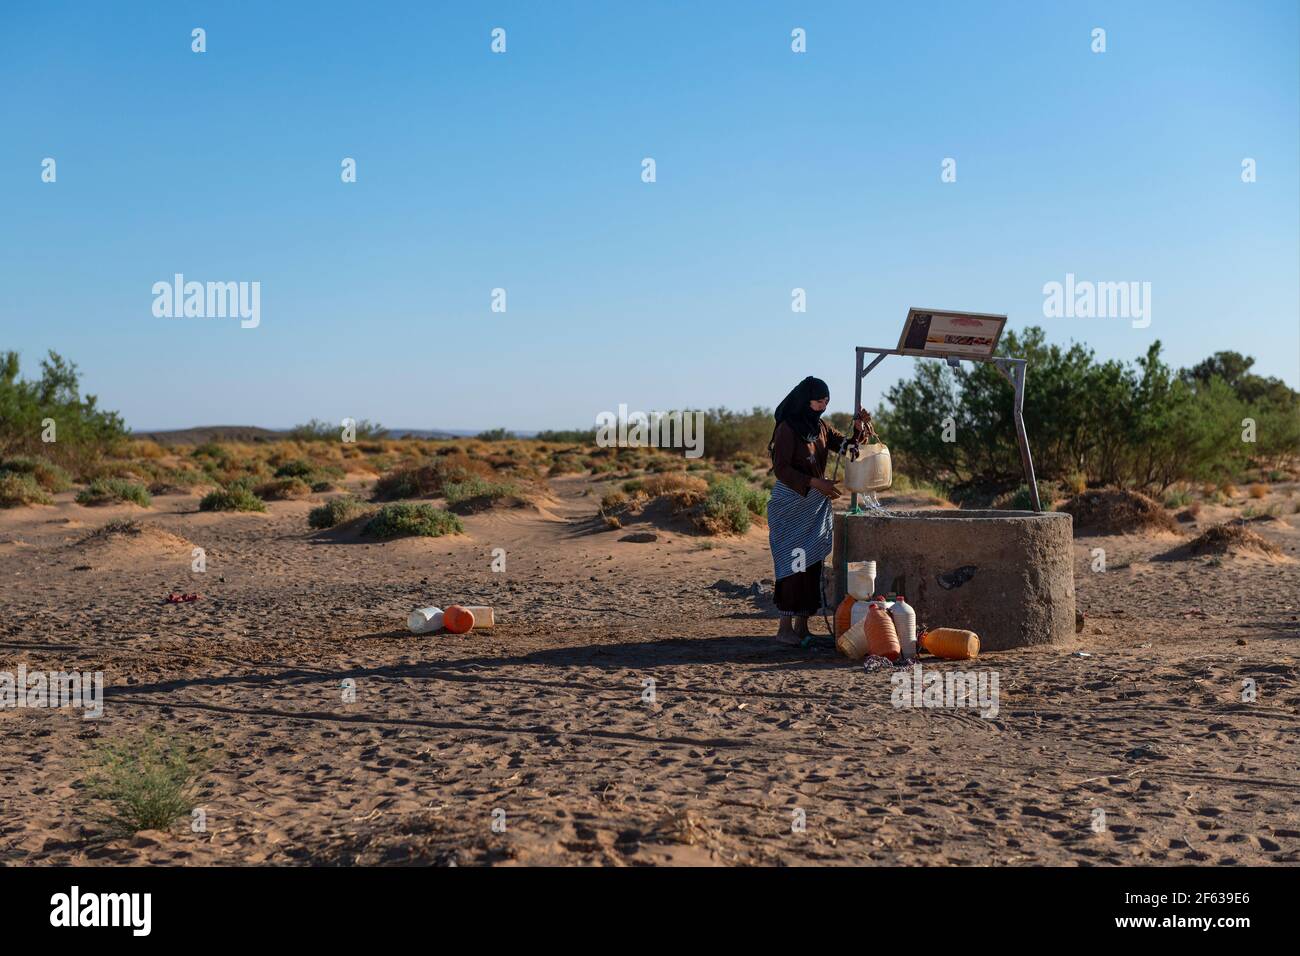 Erg Chebbi, Morocco - April 12, 2016: A berber woman collecting water from a well at Erg Chebbi, in Morocco. Stock Photo